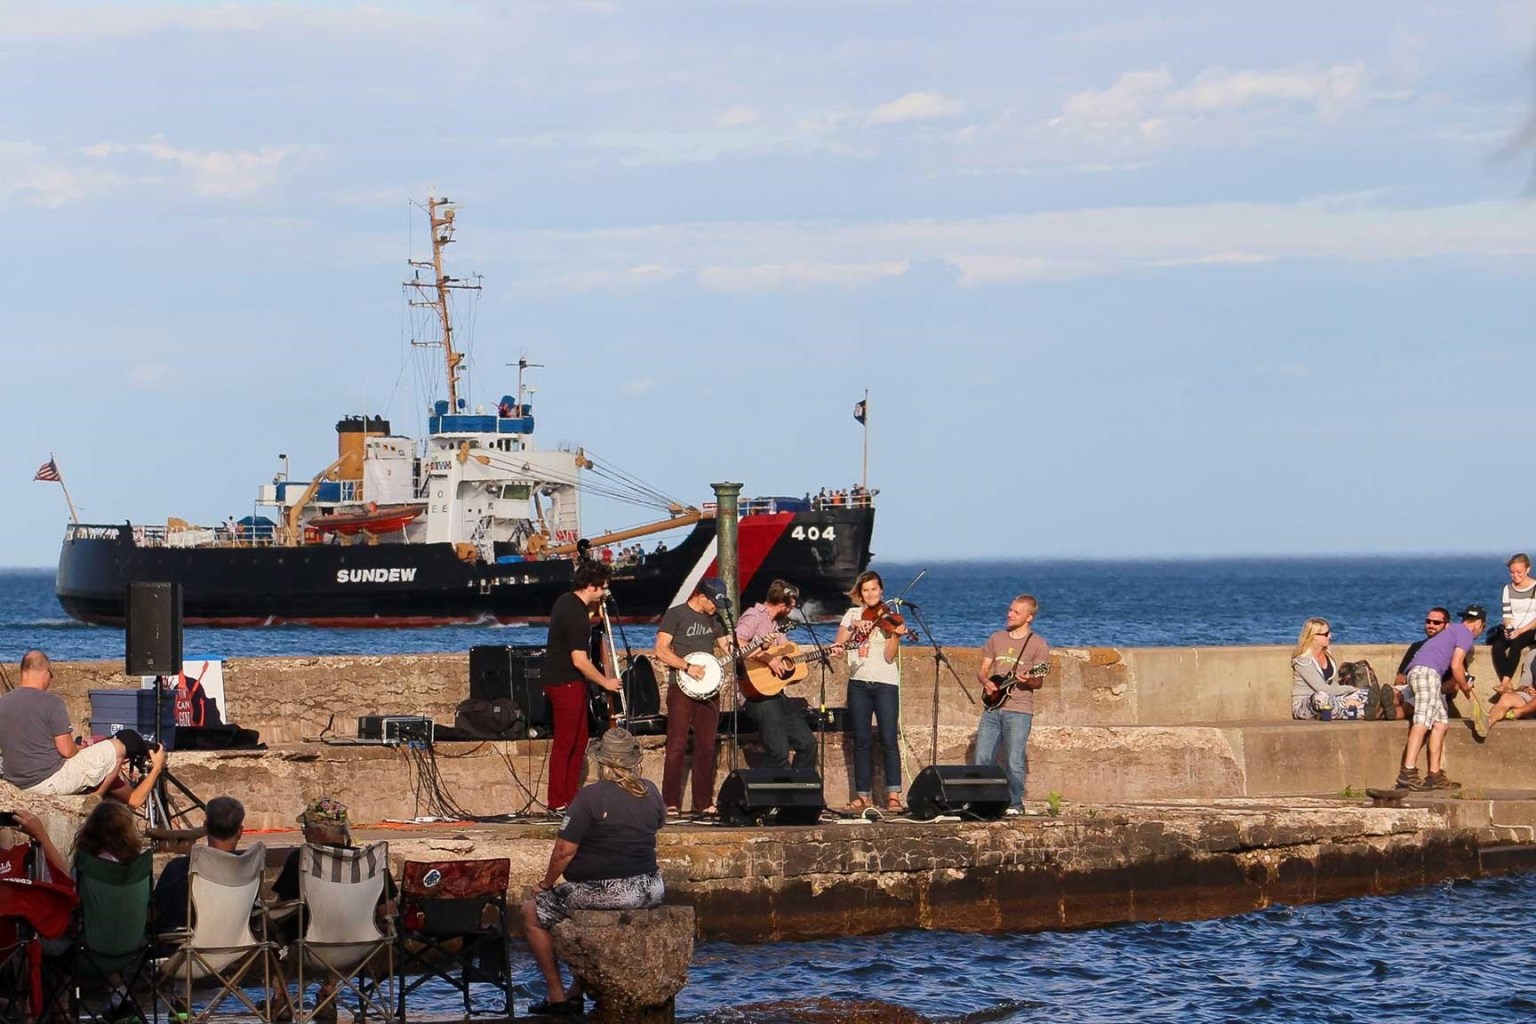 A group of people play instruments on a concrete pier in the middle of the water. A large ship is seen in the background and a small group of peopel sit in fabric folding chairs in the foreground. 